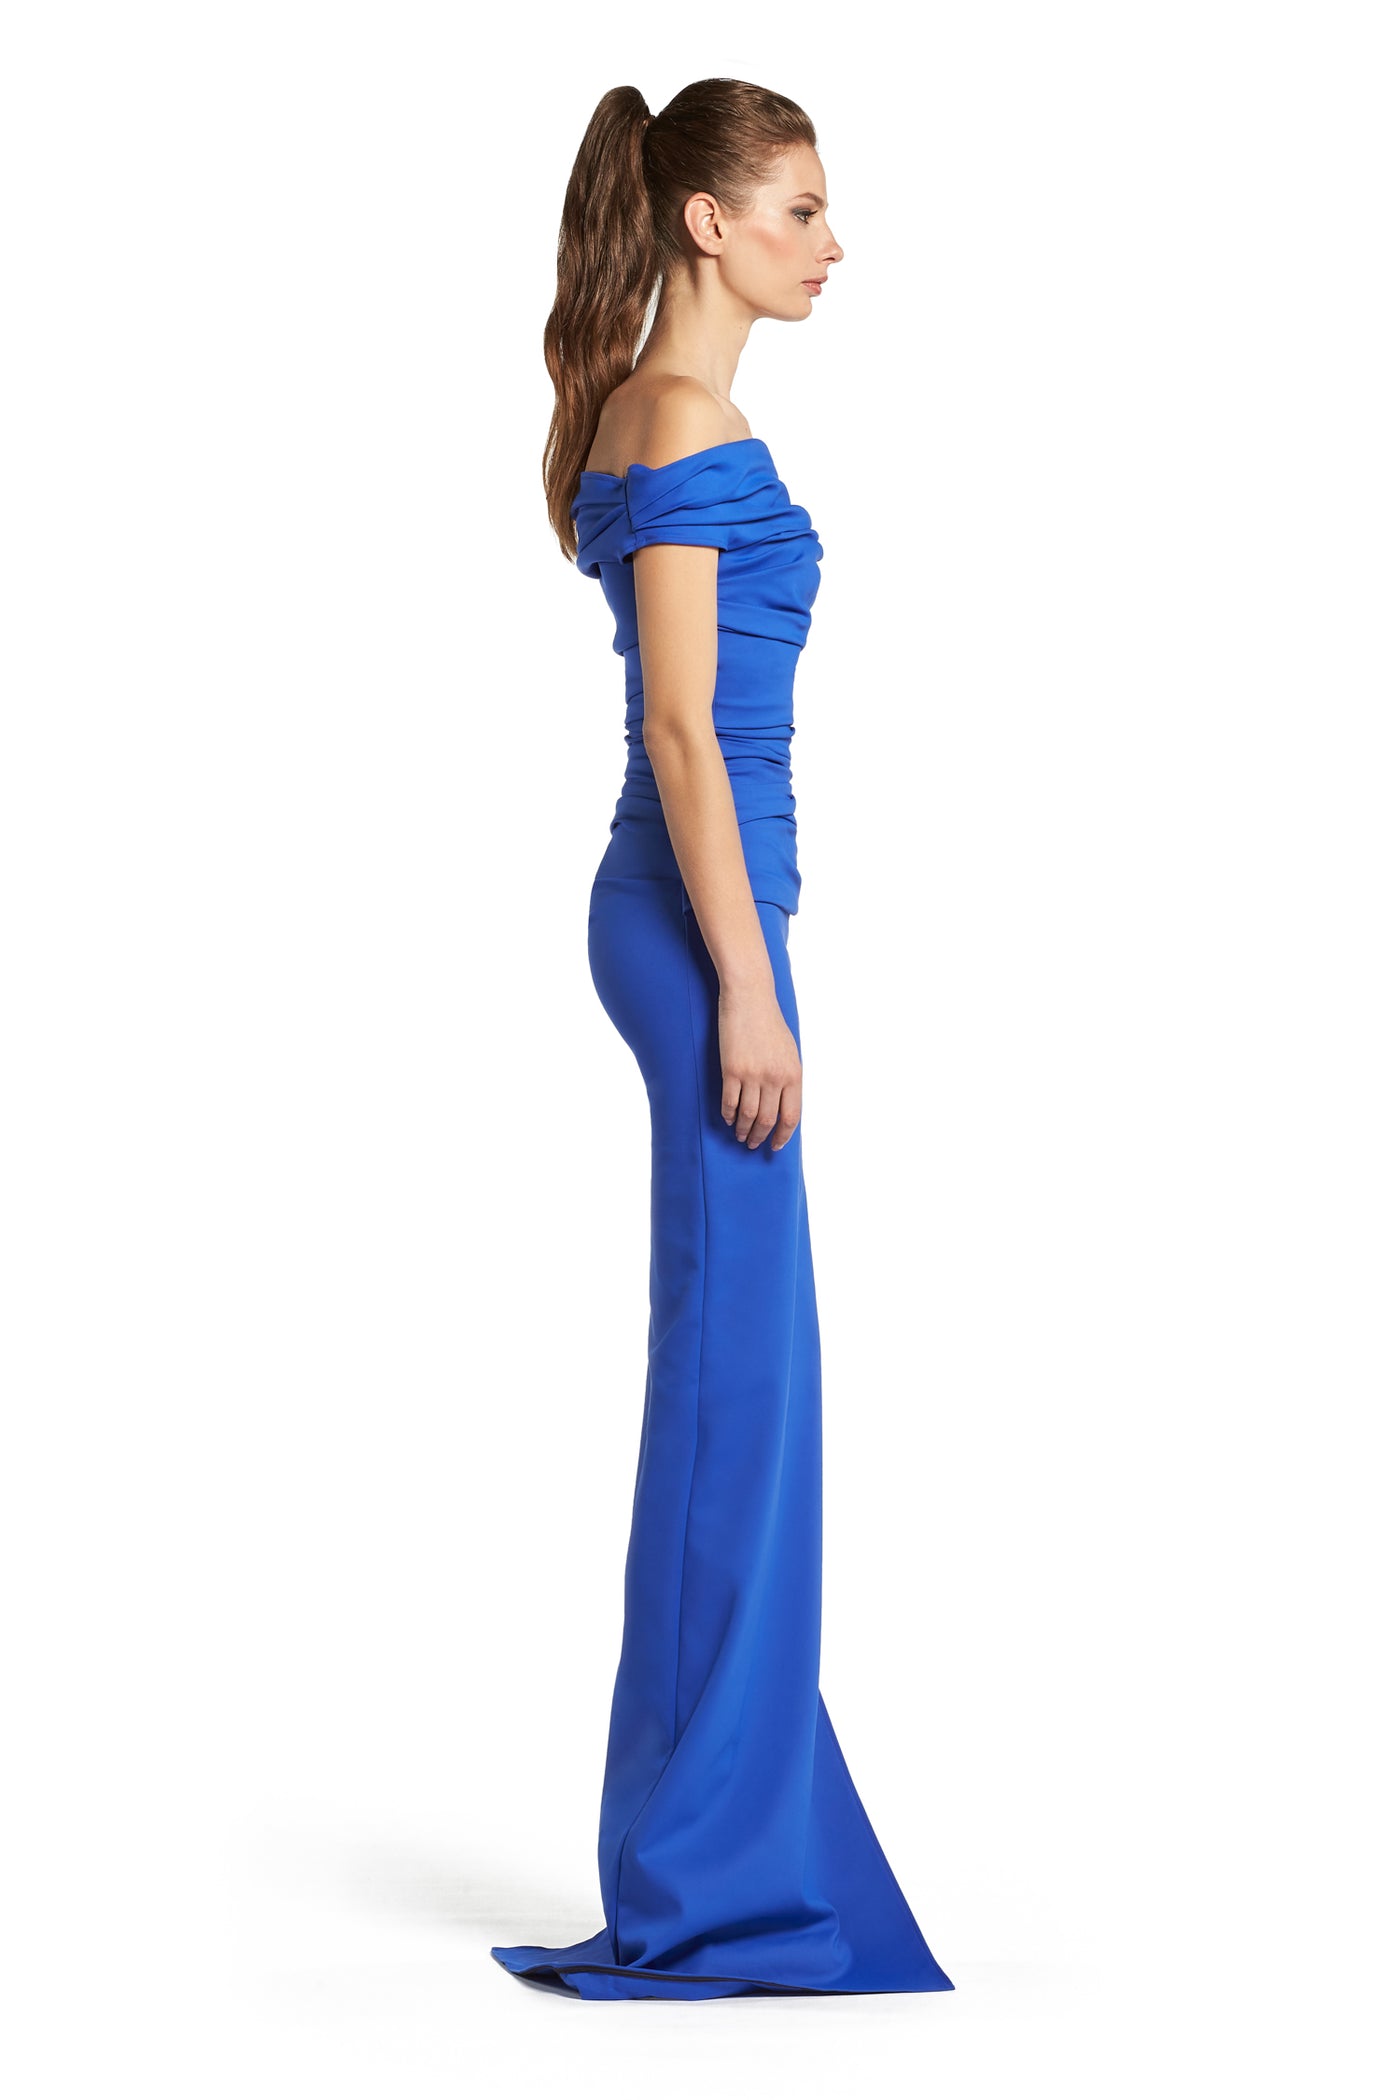 Assertion Gown - Electric